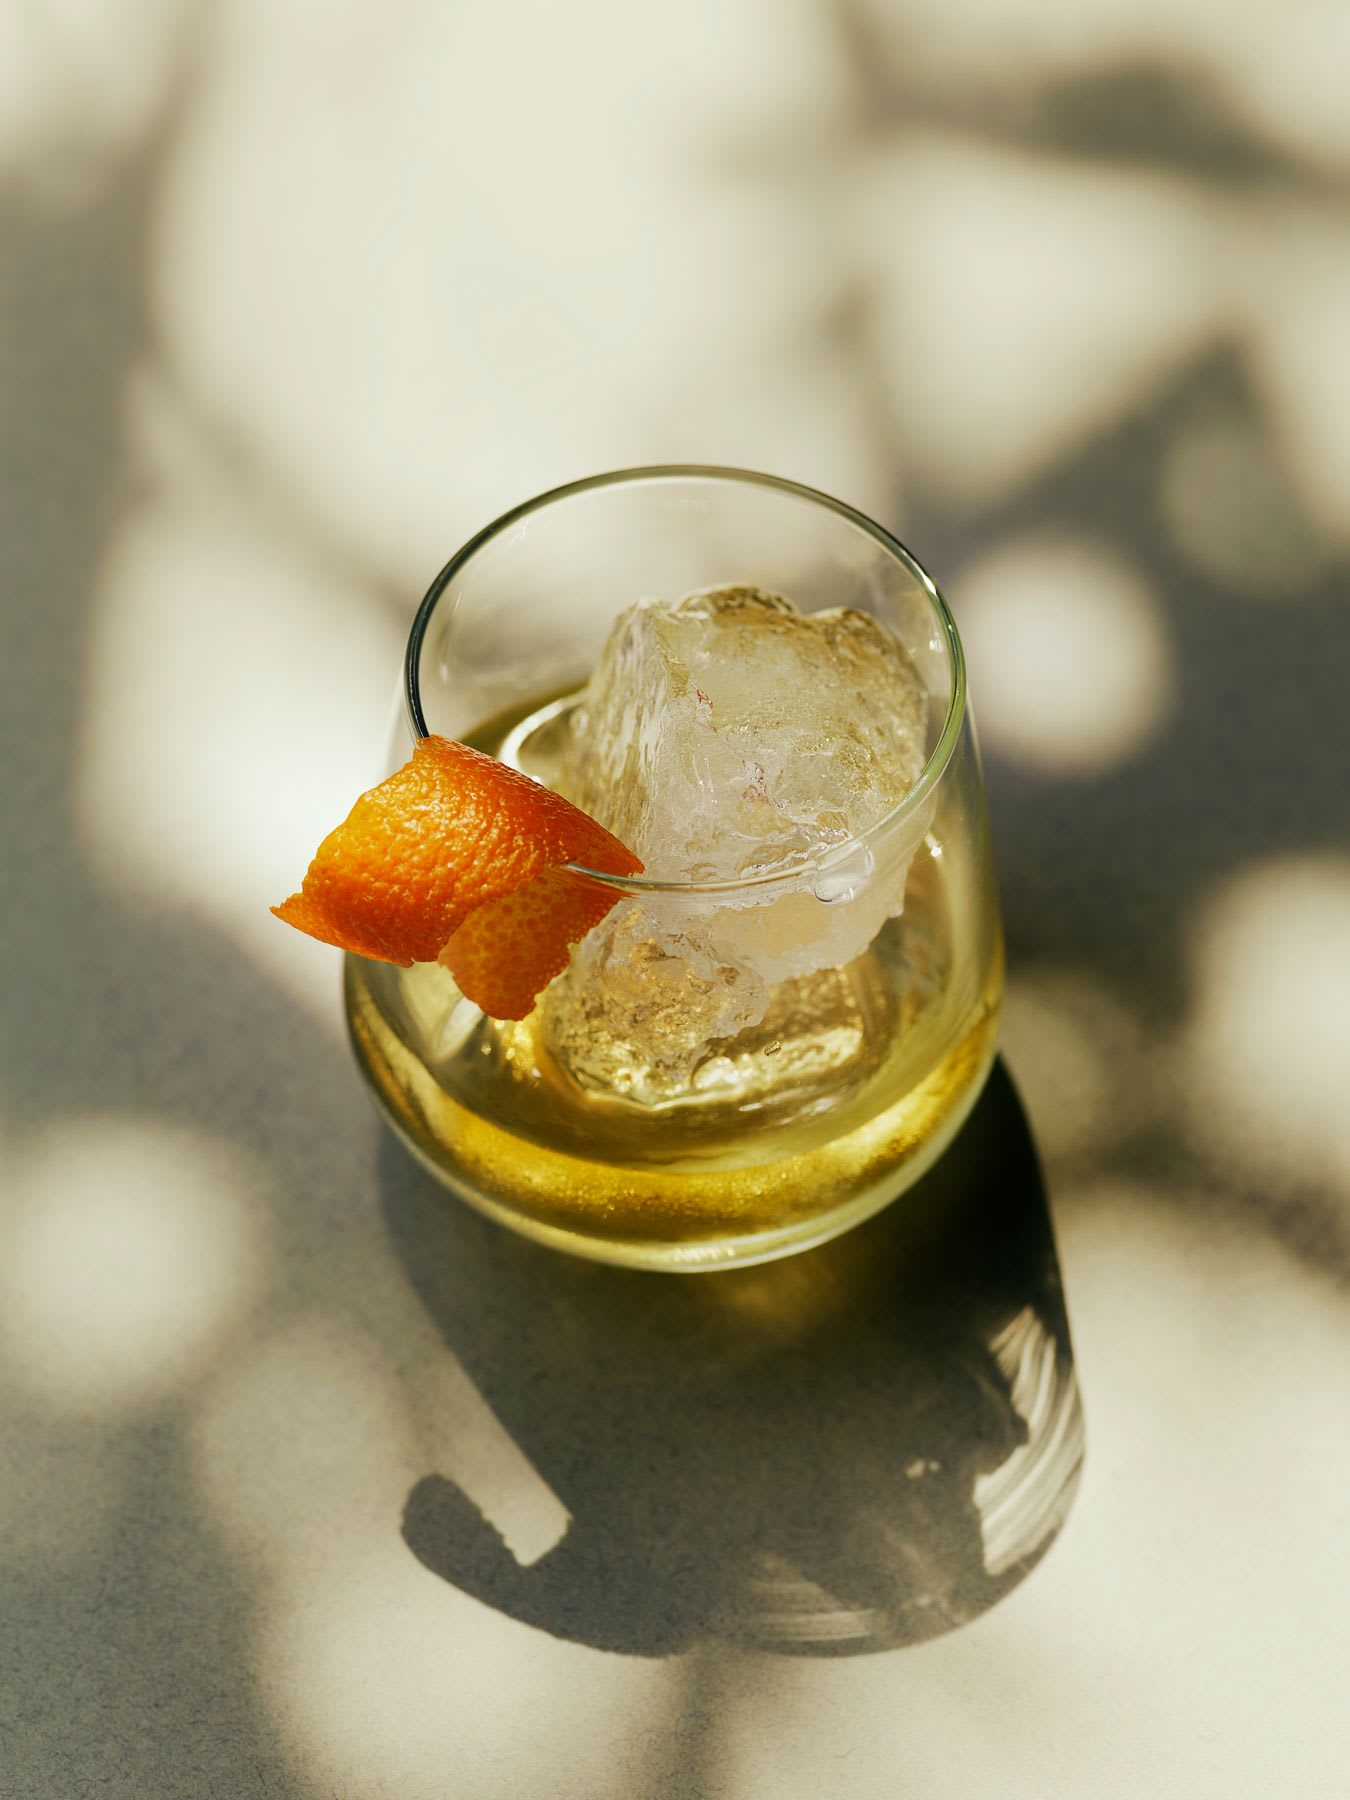 A glass of alcohol contains an orange peel garnish.